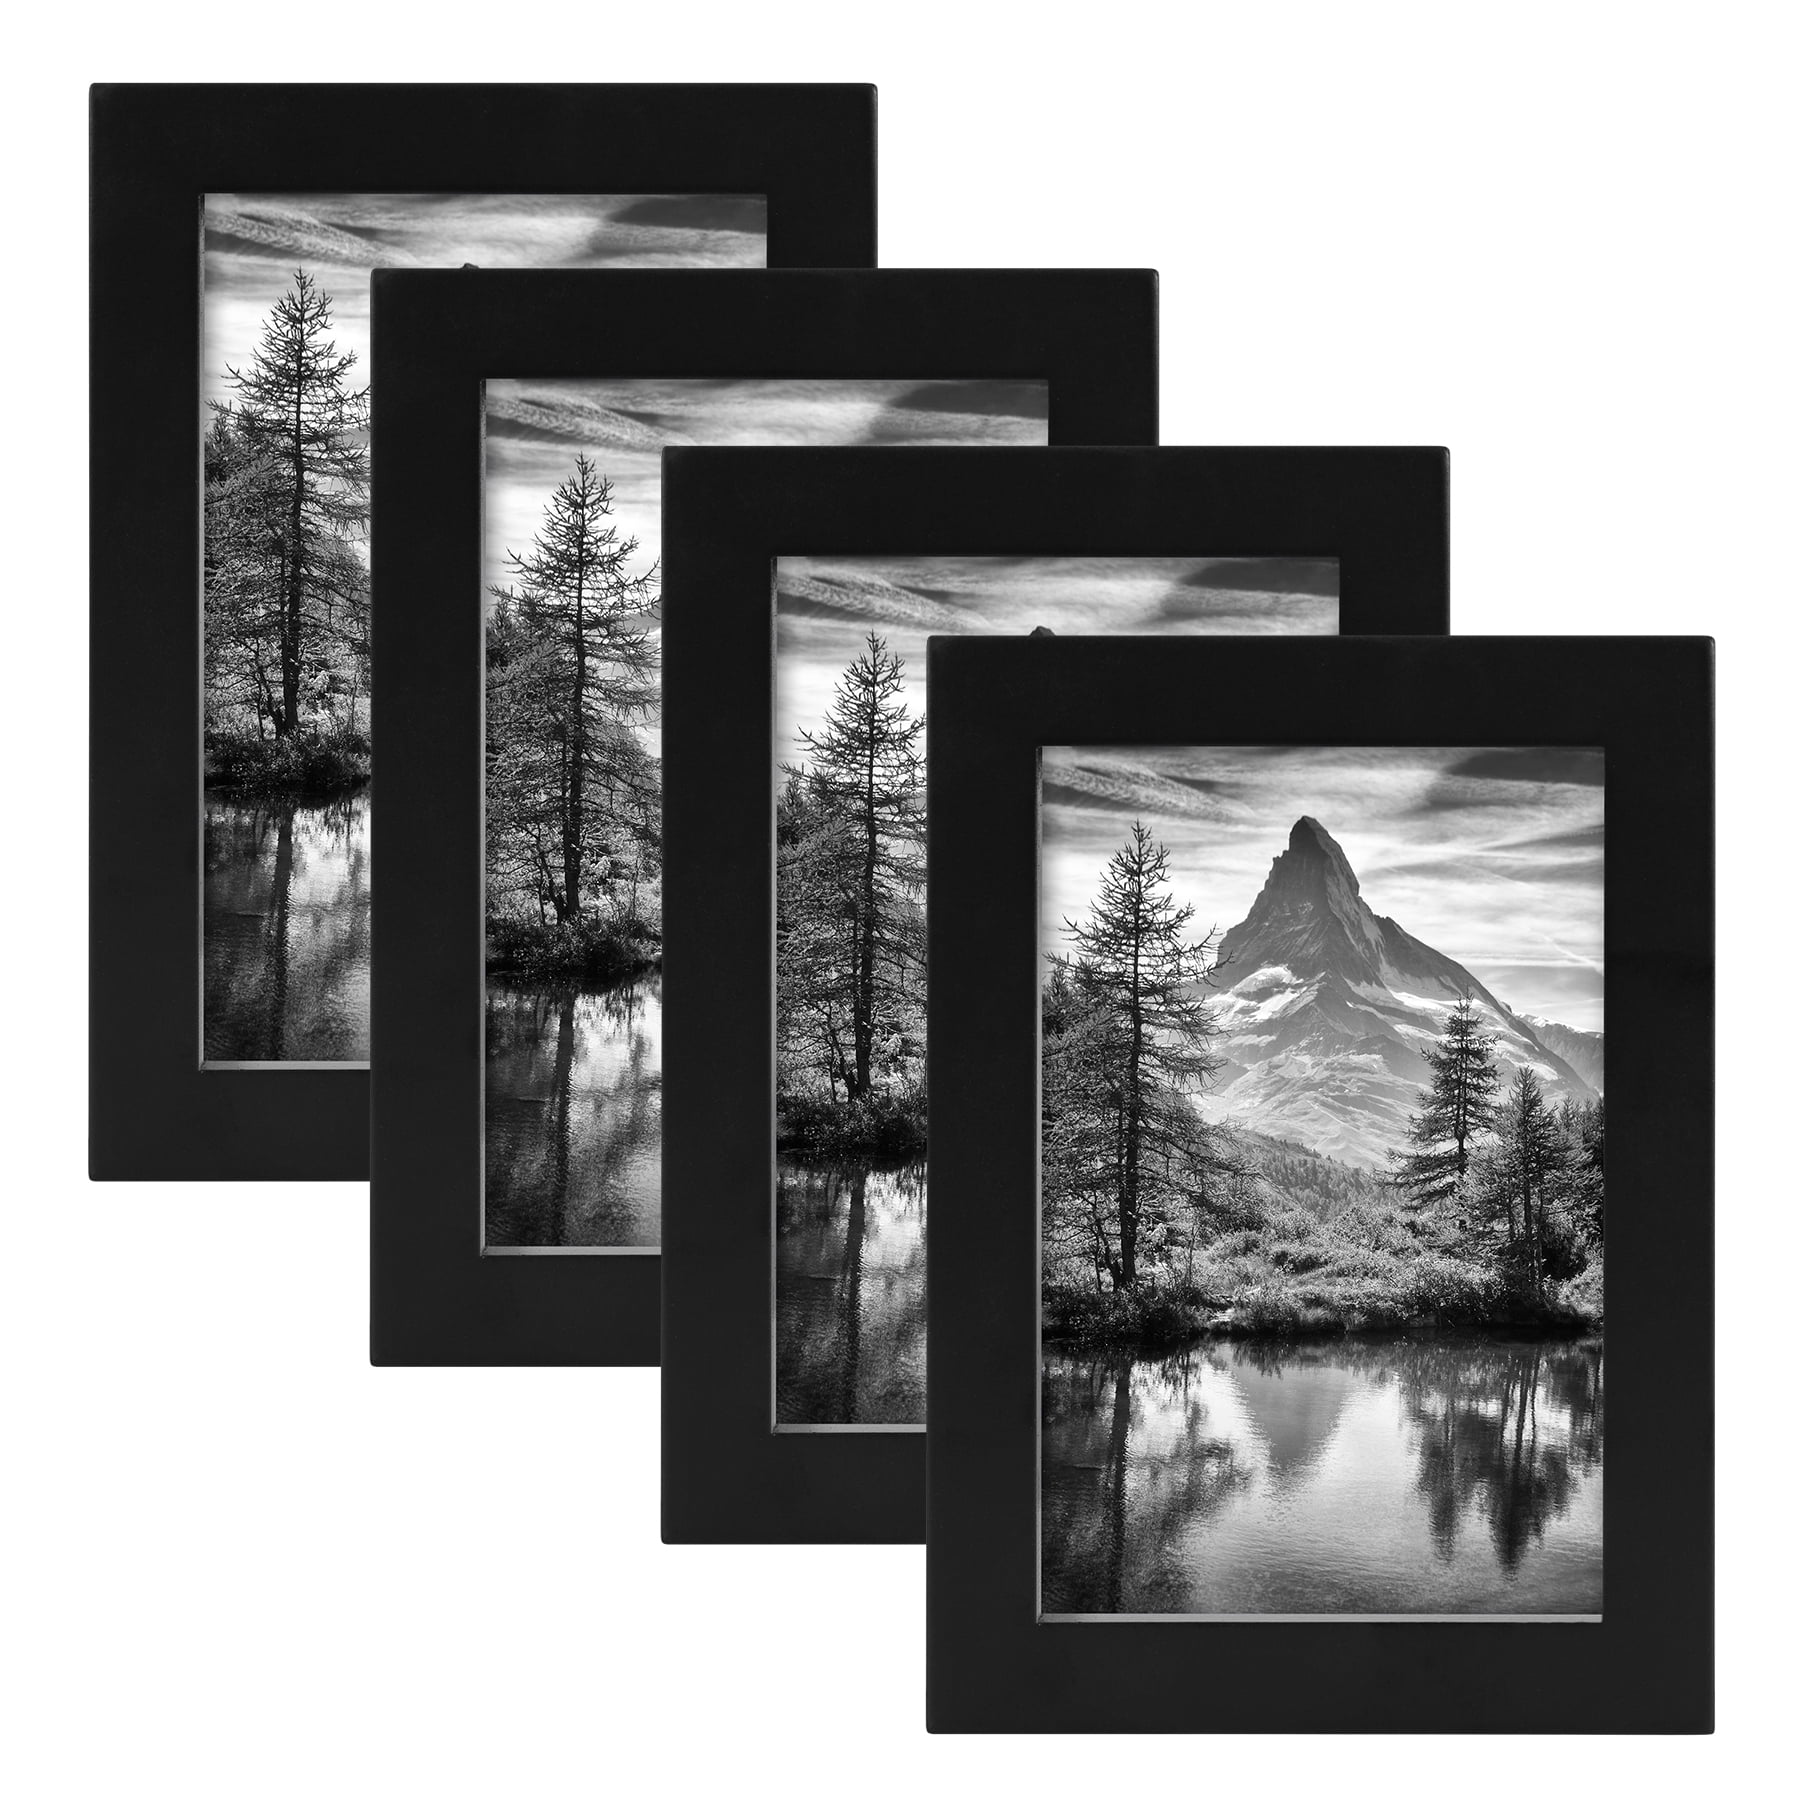 Hastings Home Hastings Home 4x6 Picture Frames - 6 Pack, Black 167604DGA